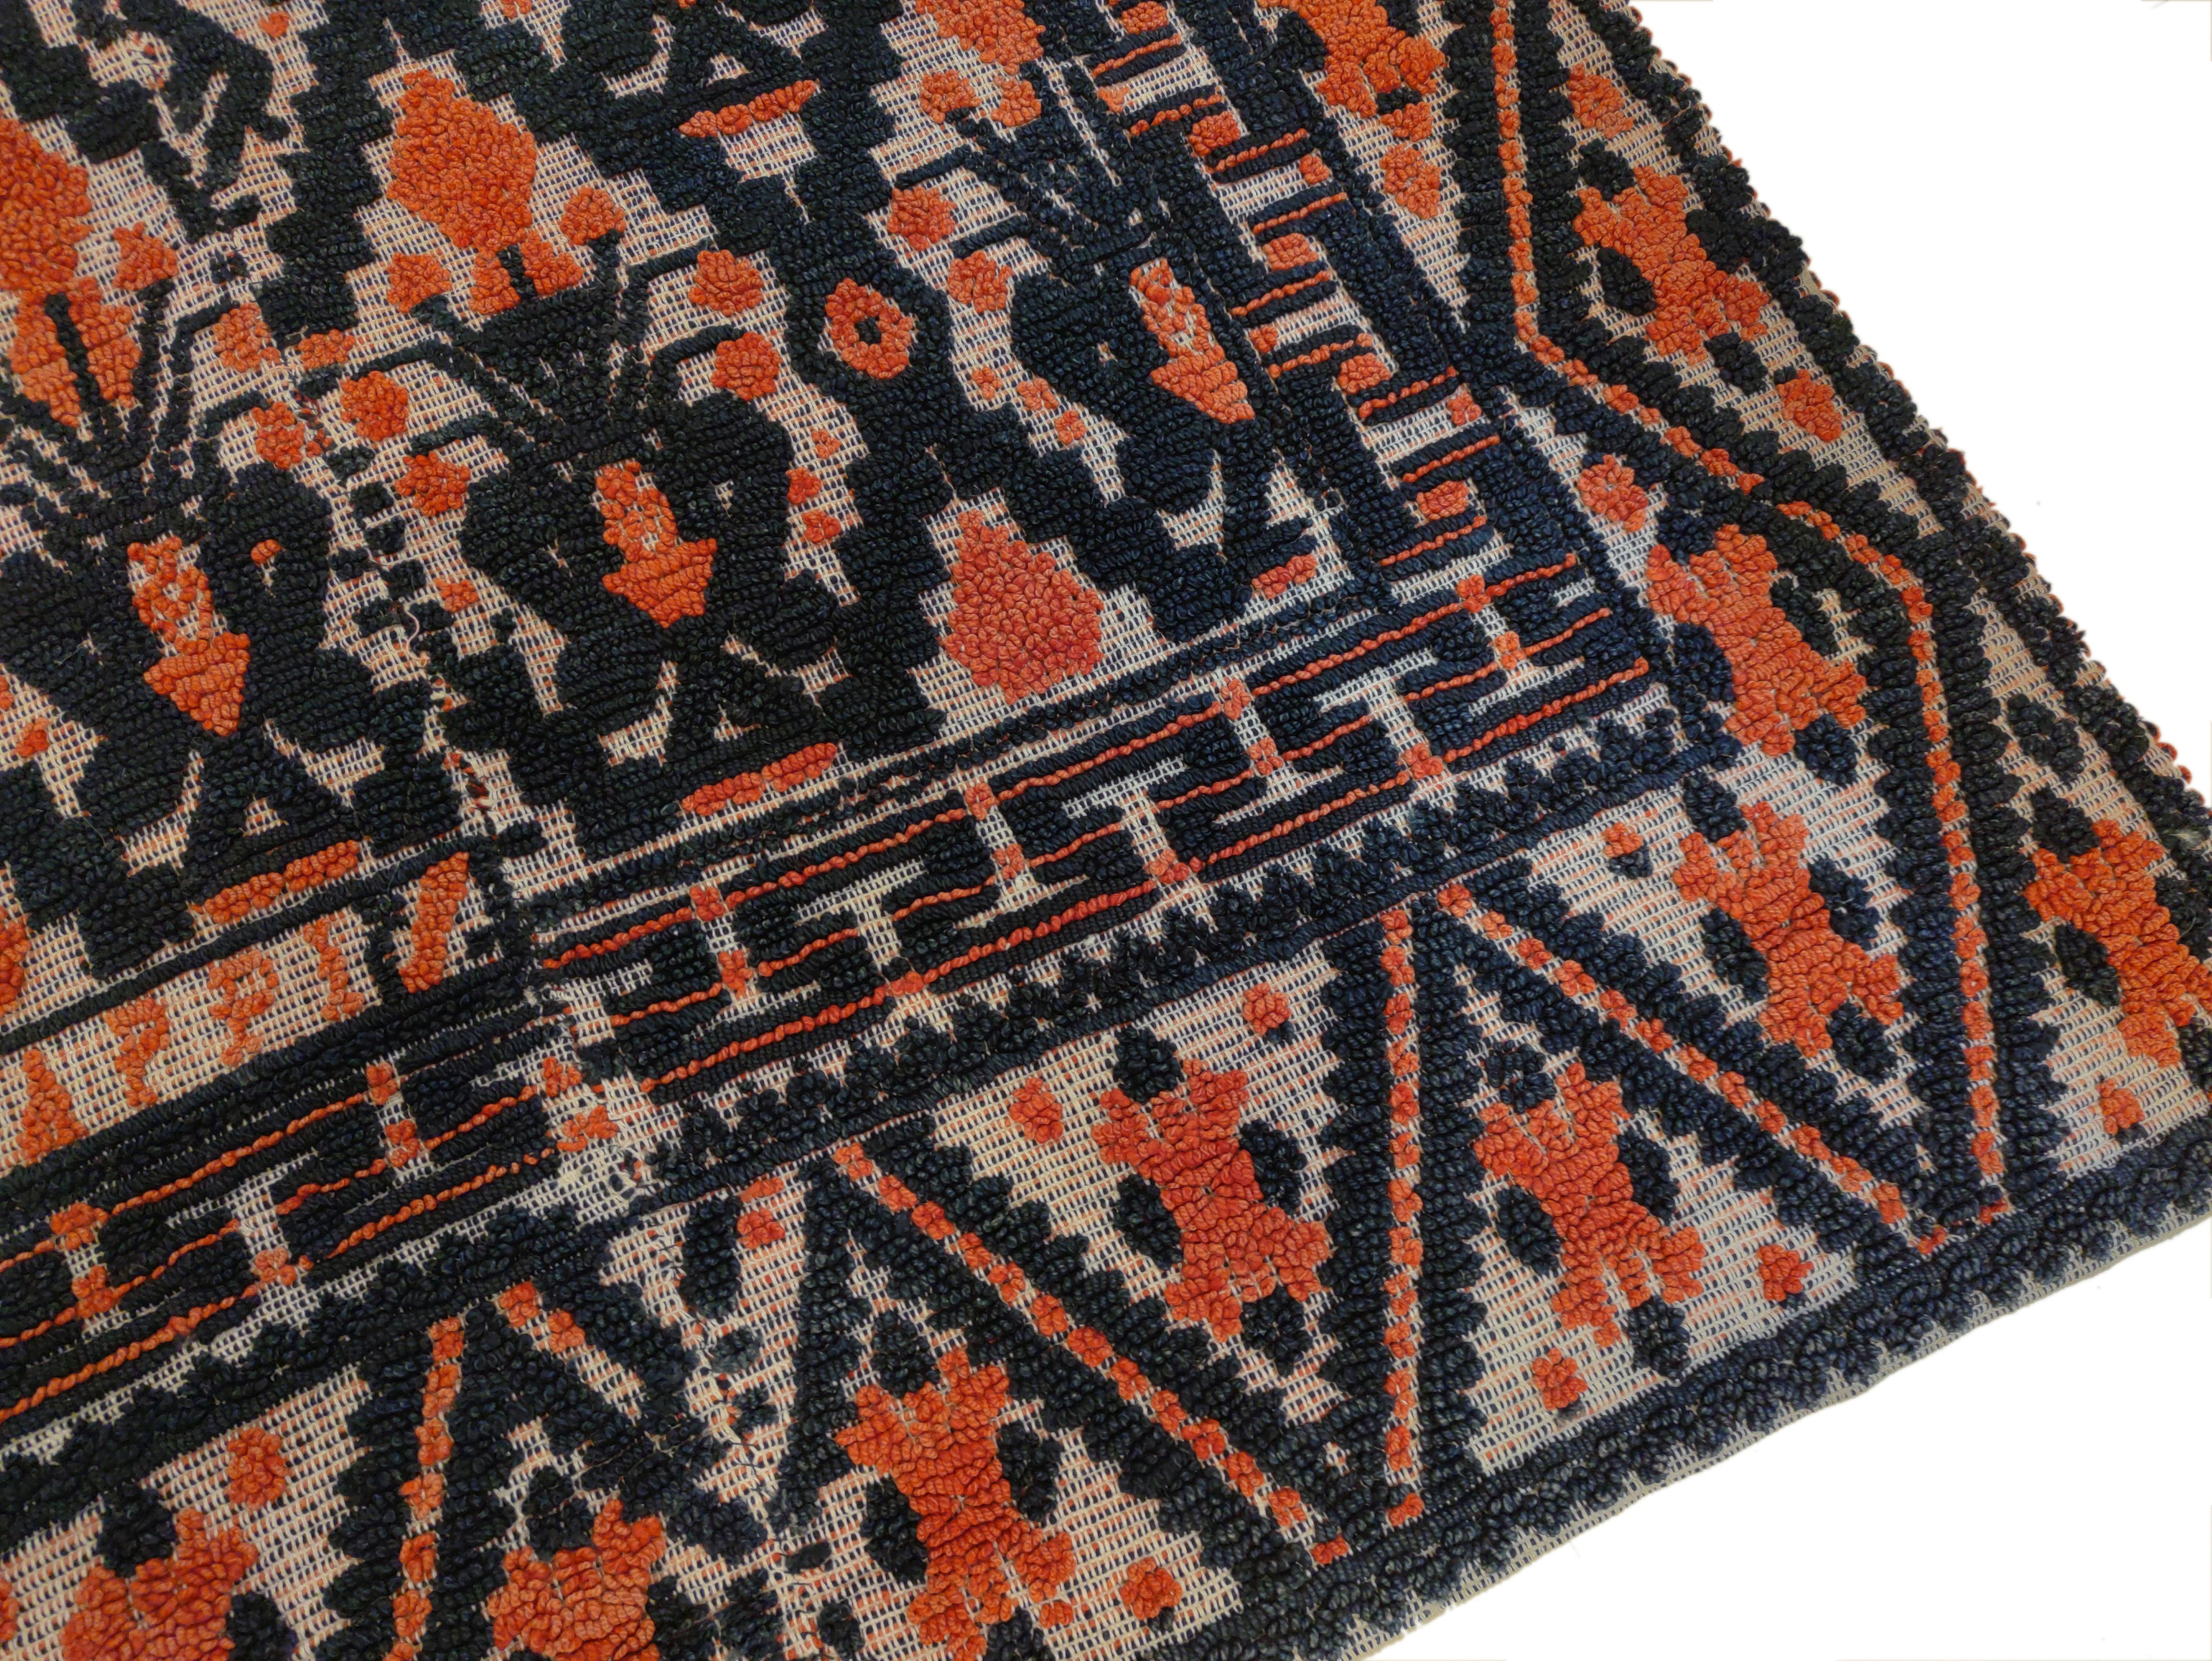 Moorish Antique Alpujarra Spanish Textured Rug Signed and Dated 1891 For Sale